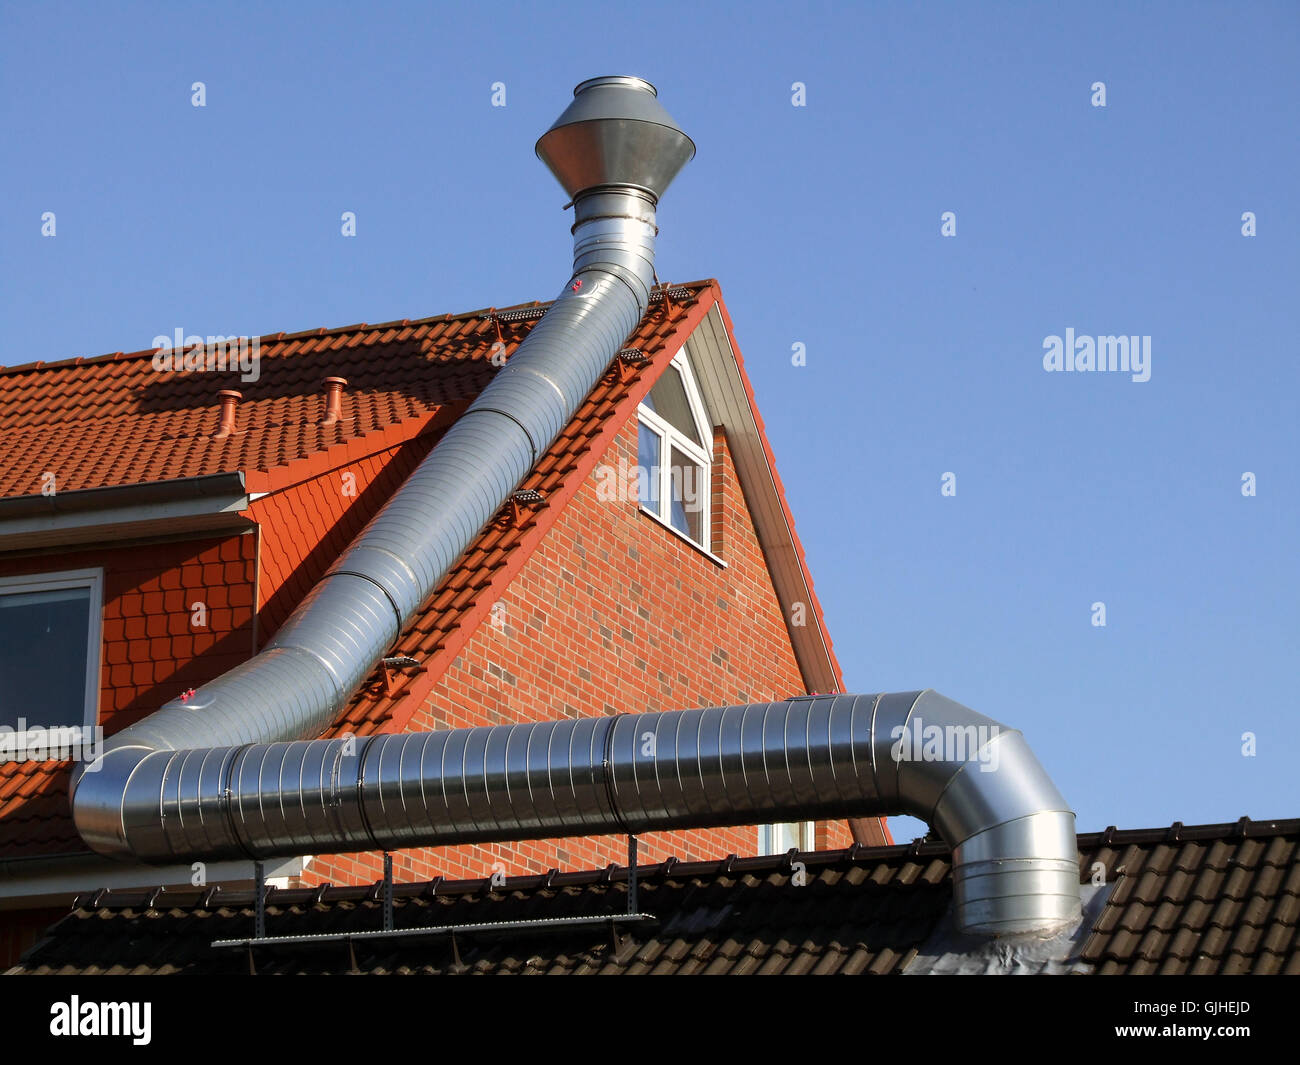 environmental protection extracted air air-conditioning Stock Photo